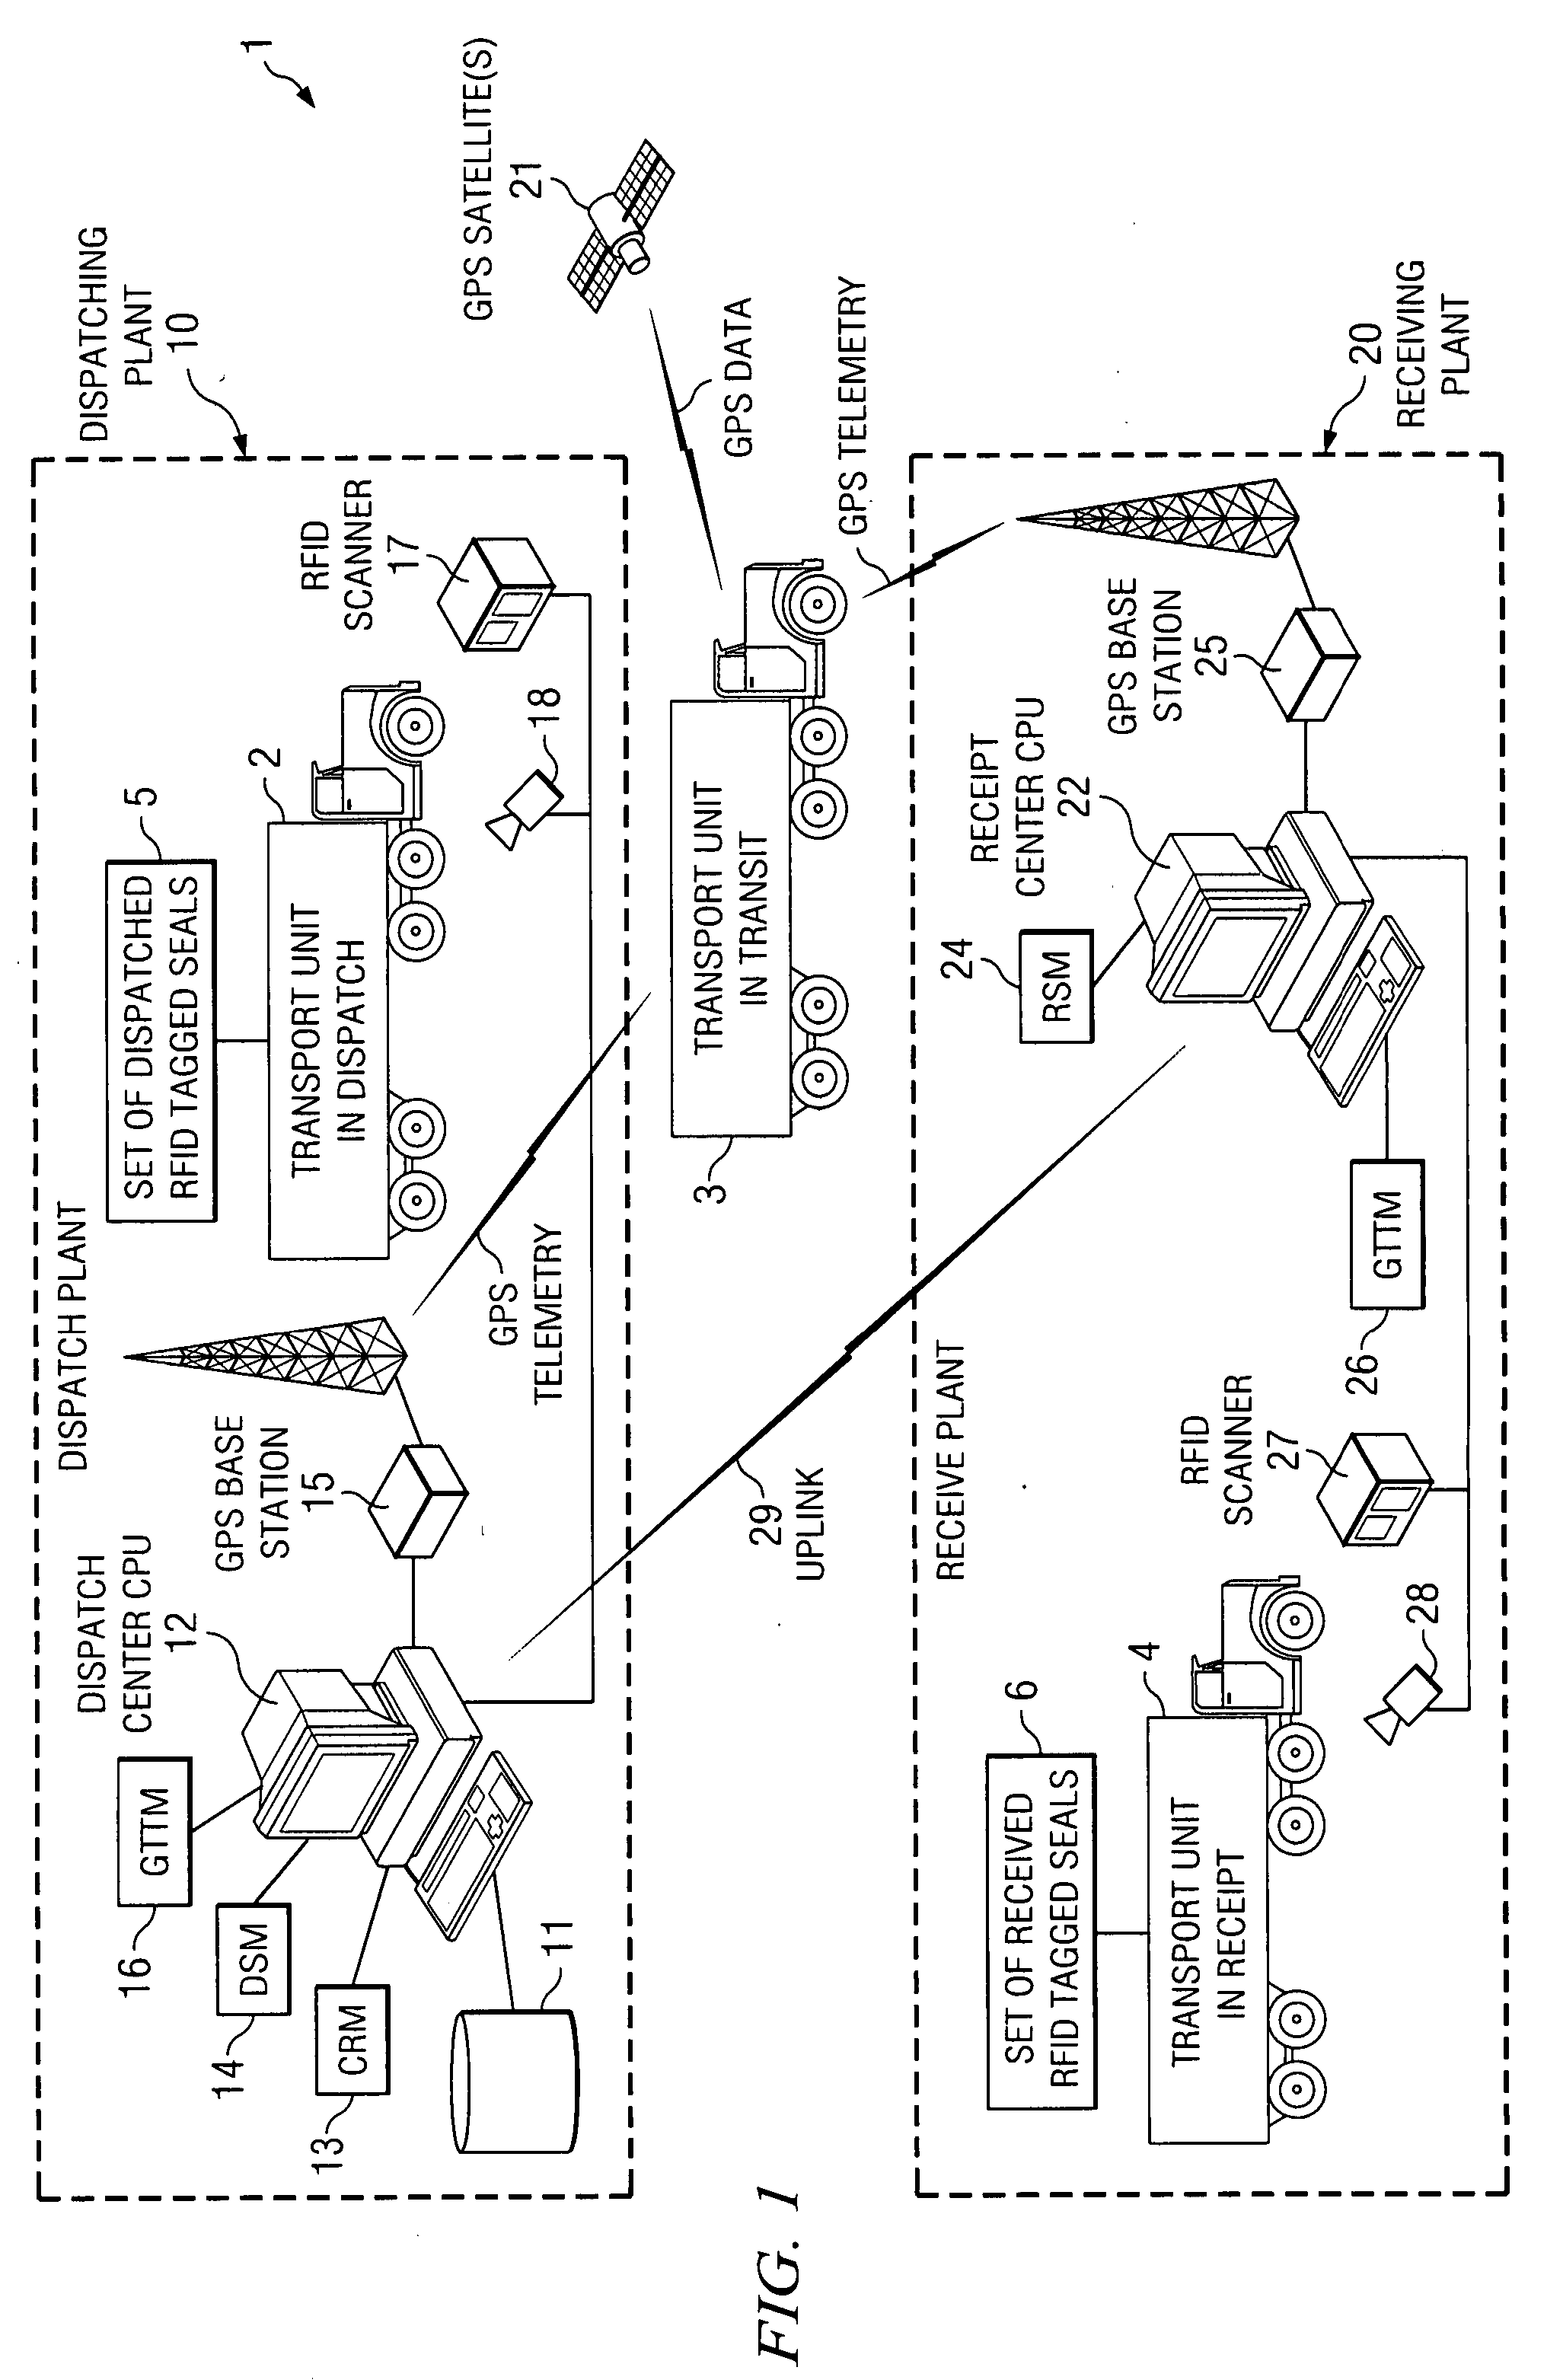 System and method for transport security control and tracking